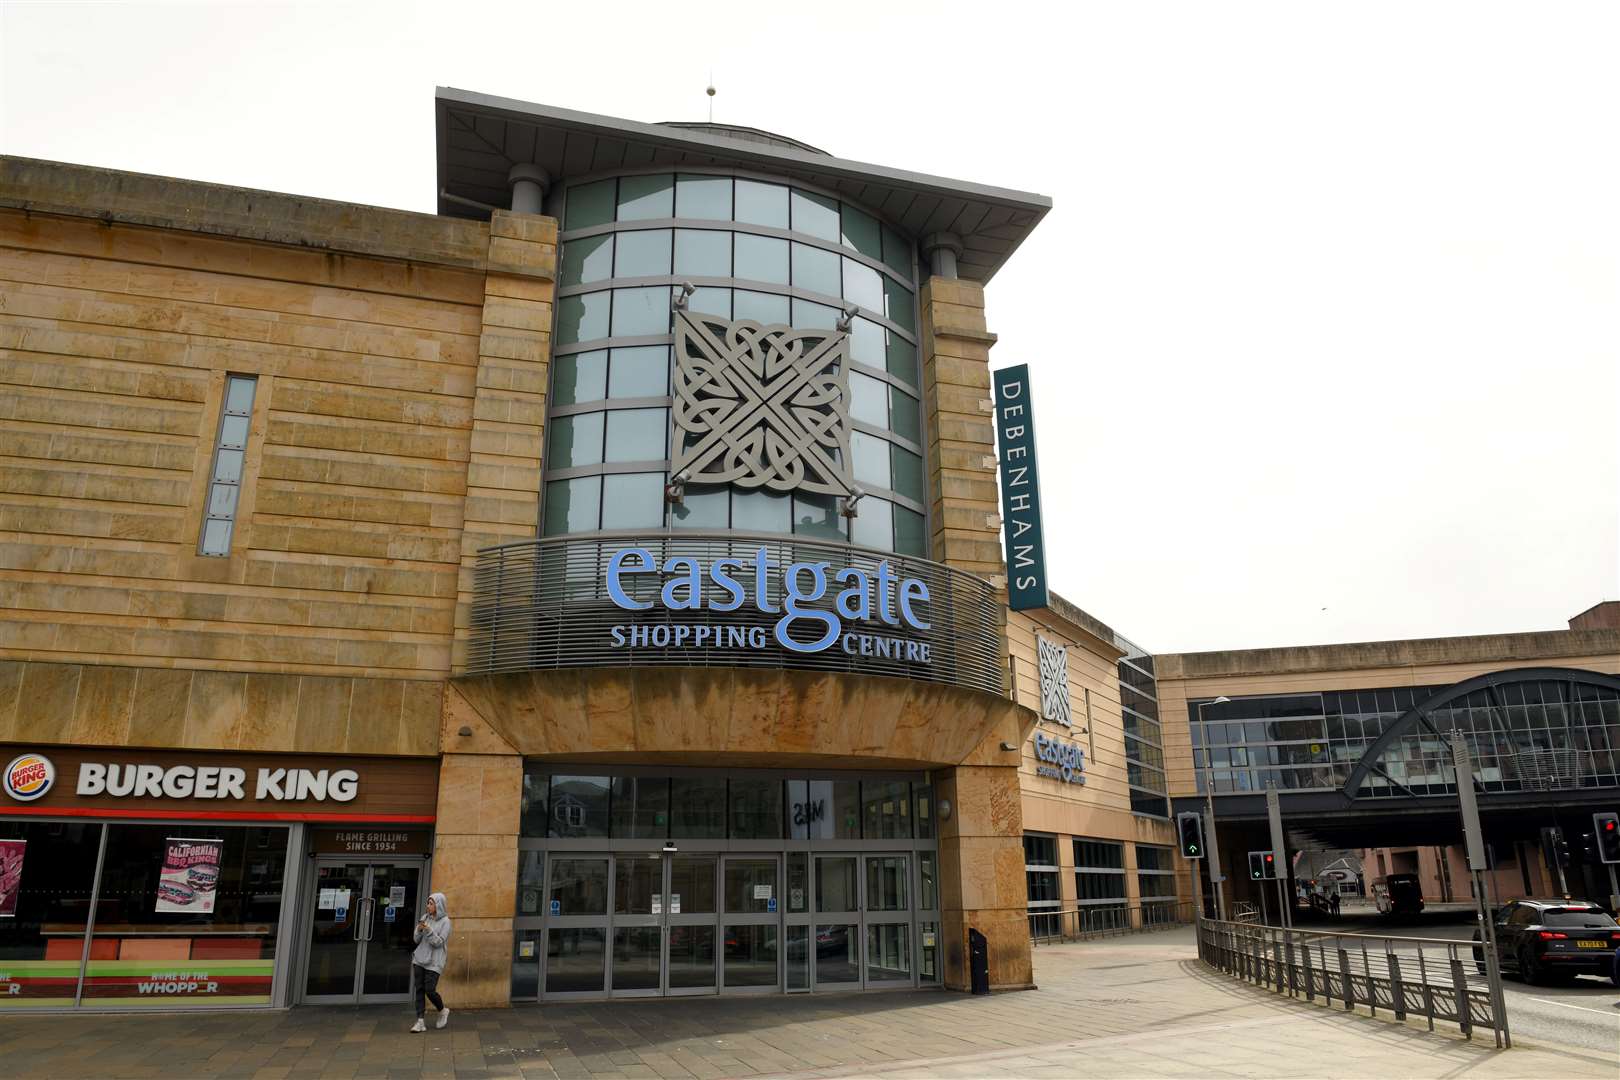 More resources are being implemented to tackle shoplifting at Eastgate Shopping Centre.